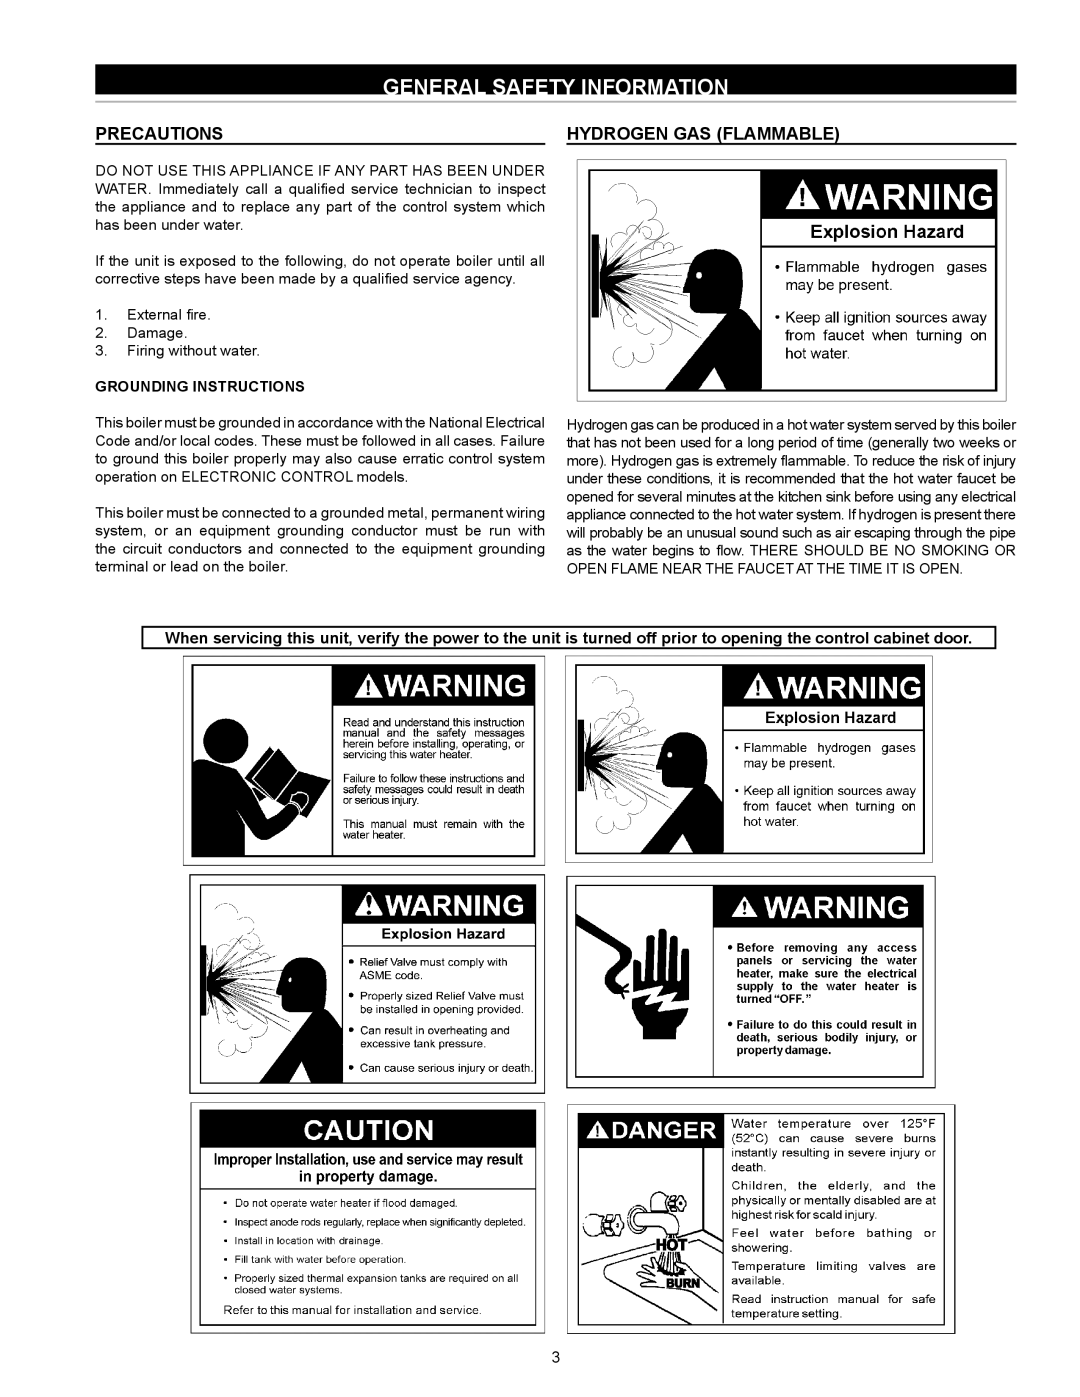 State Industries SW 37-670 General Safety Information, Precautions, Hydrogen Gas Flammable, Grounding Instructions 